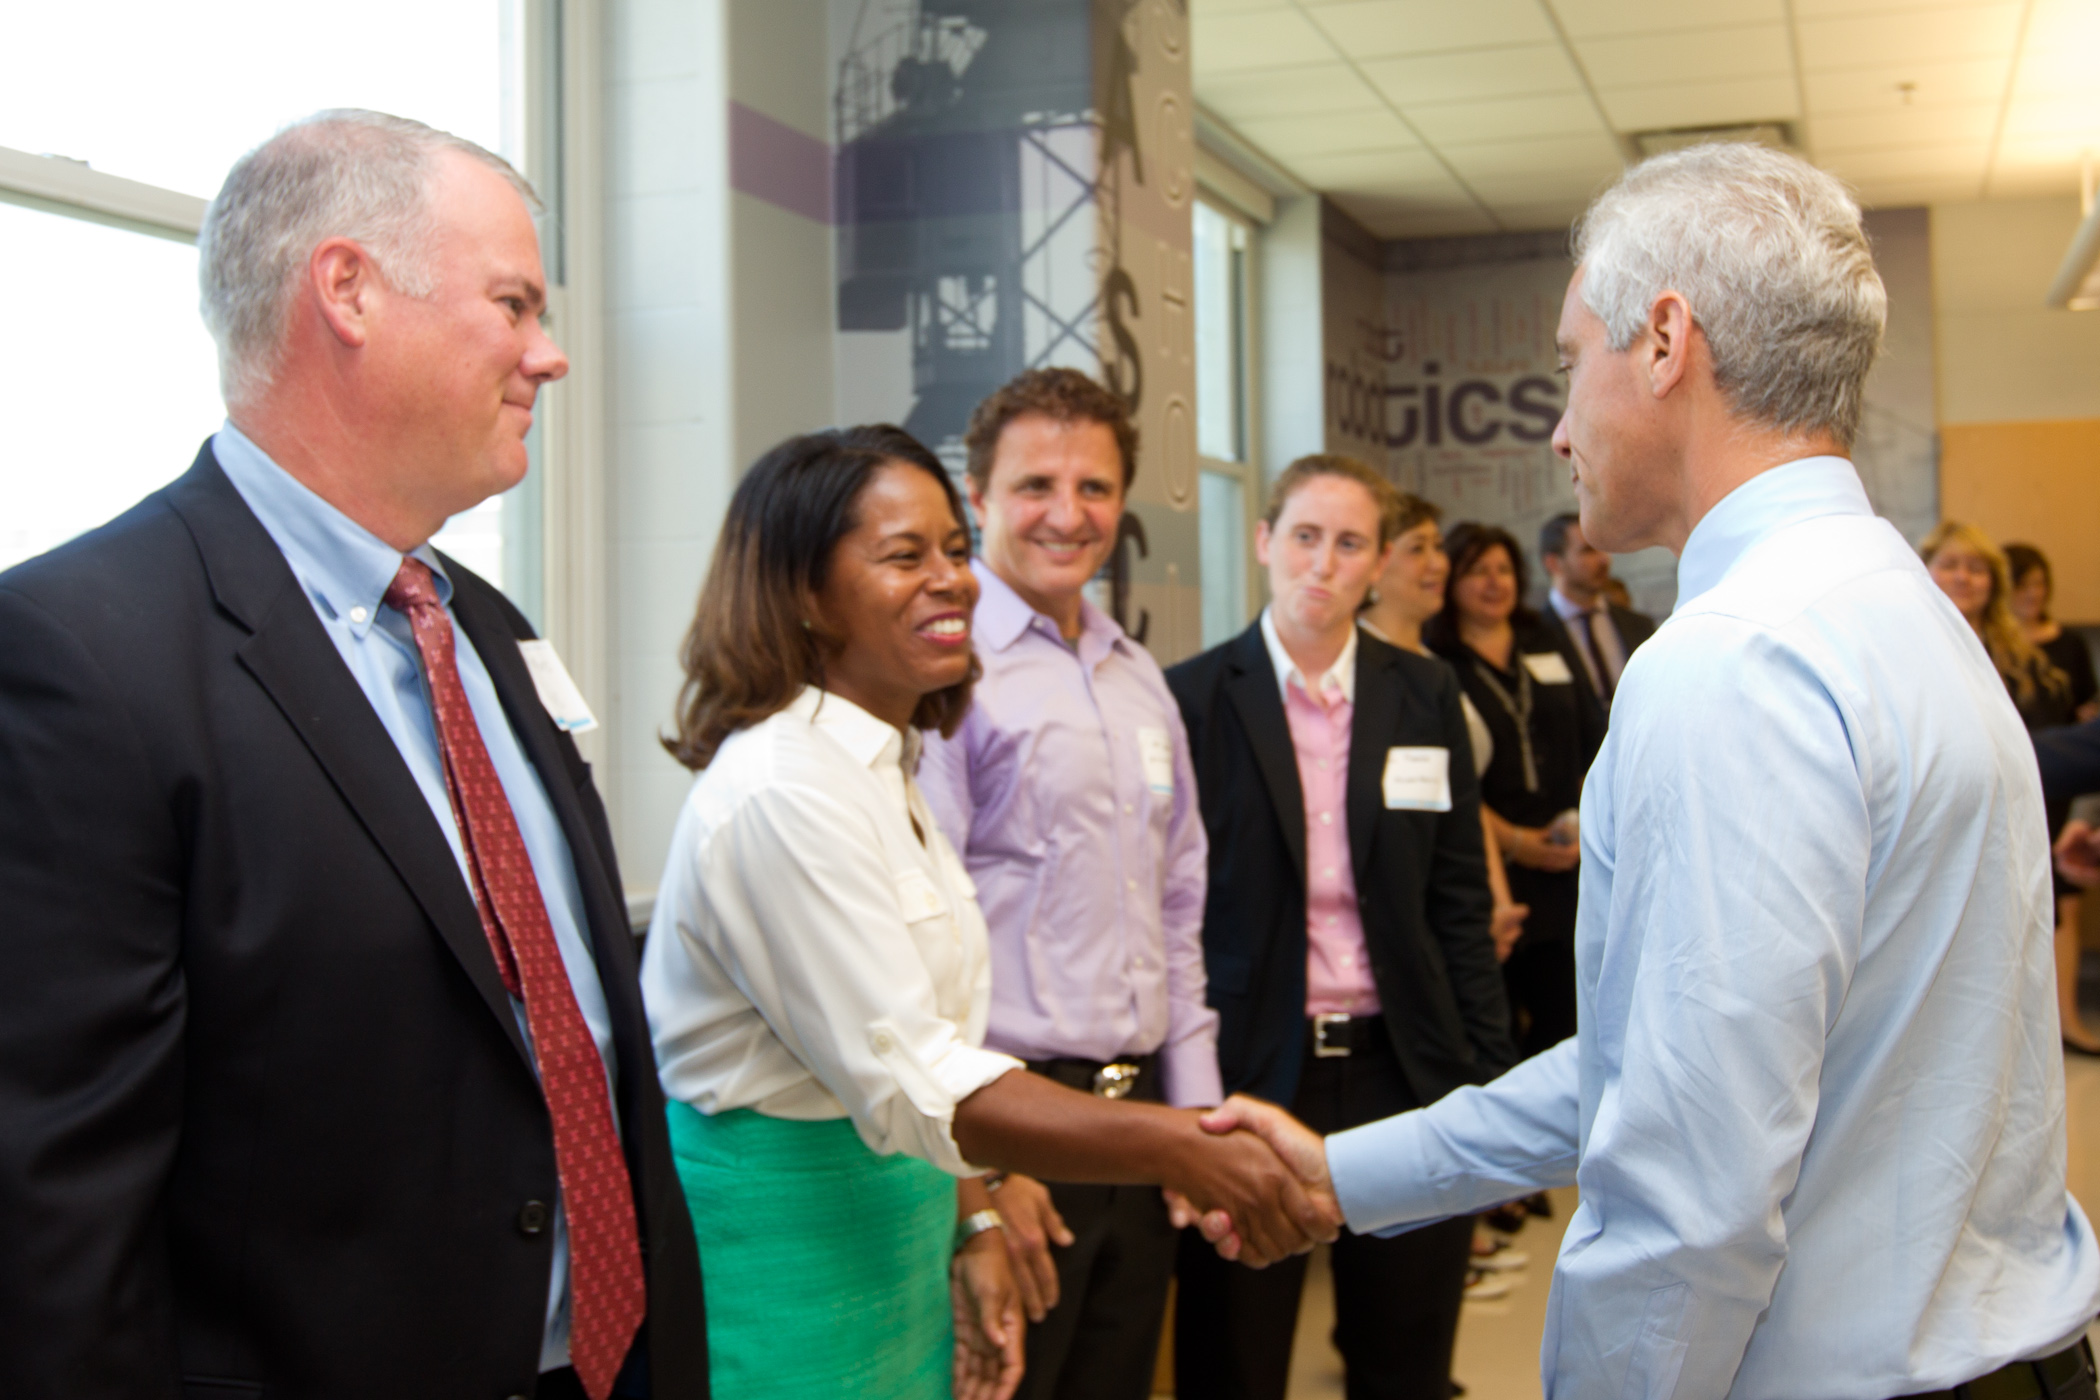 Mayor Emanuel joins corporate engineering partners and CPS leadership in touring a new engineering lab at Westinghouse College Prep, made possible with support of corporate partner Paschen.